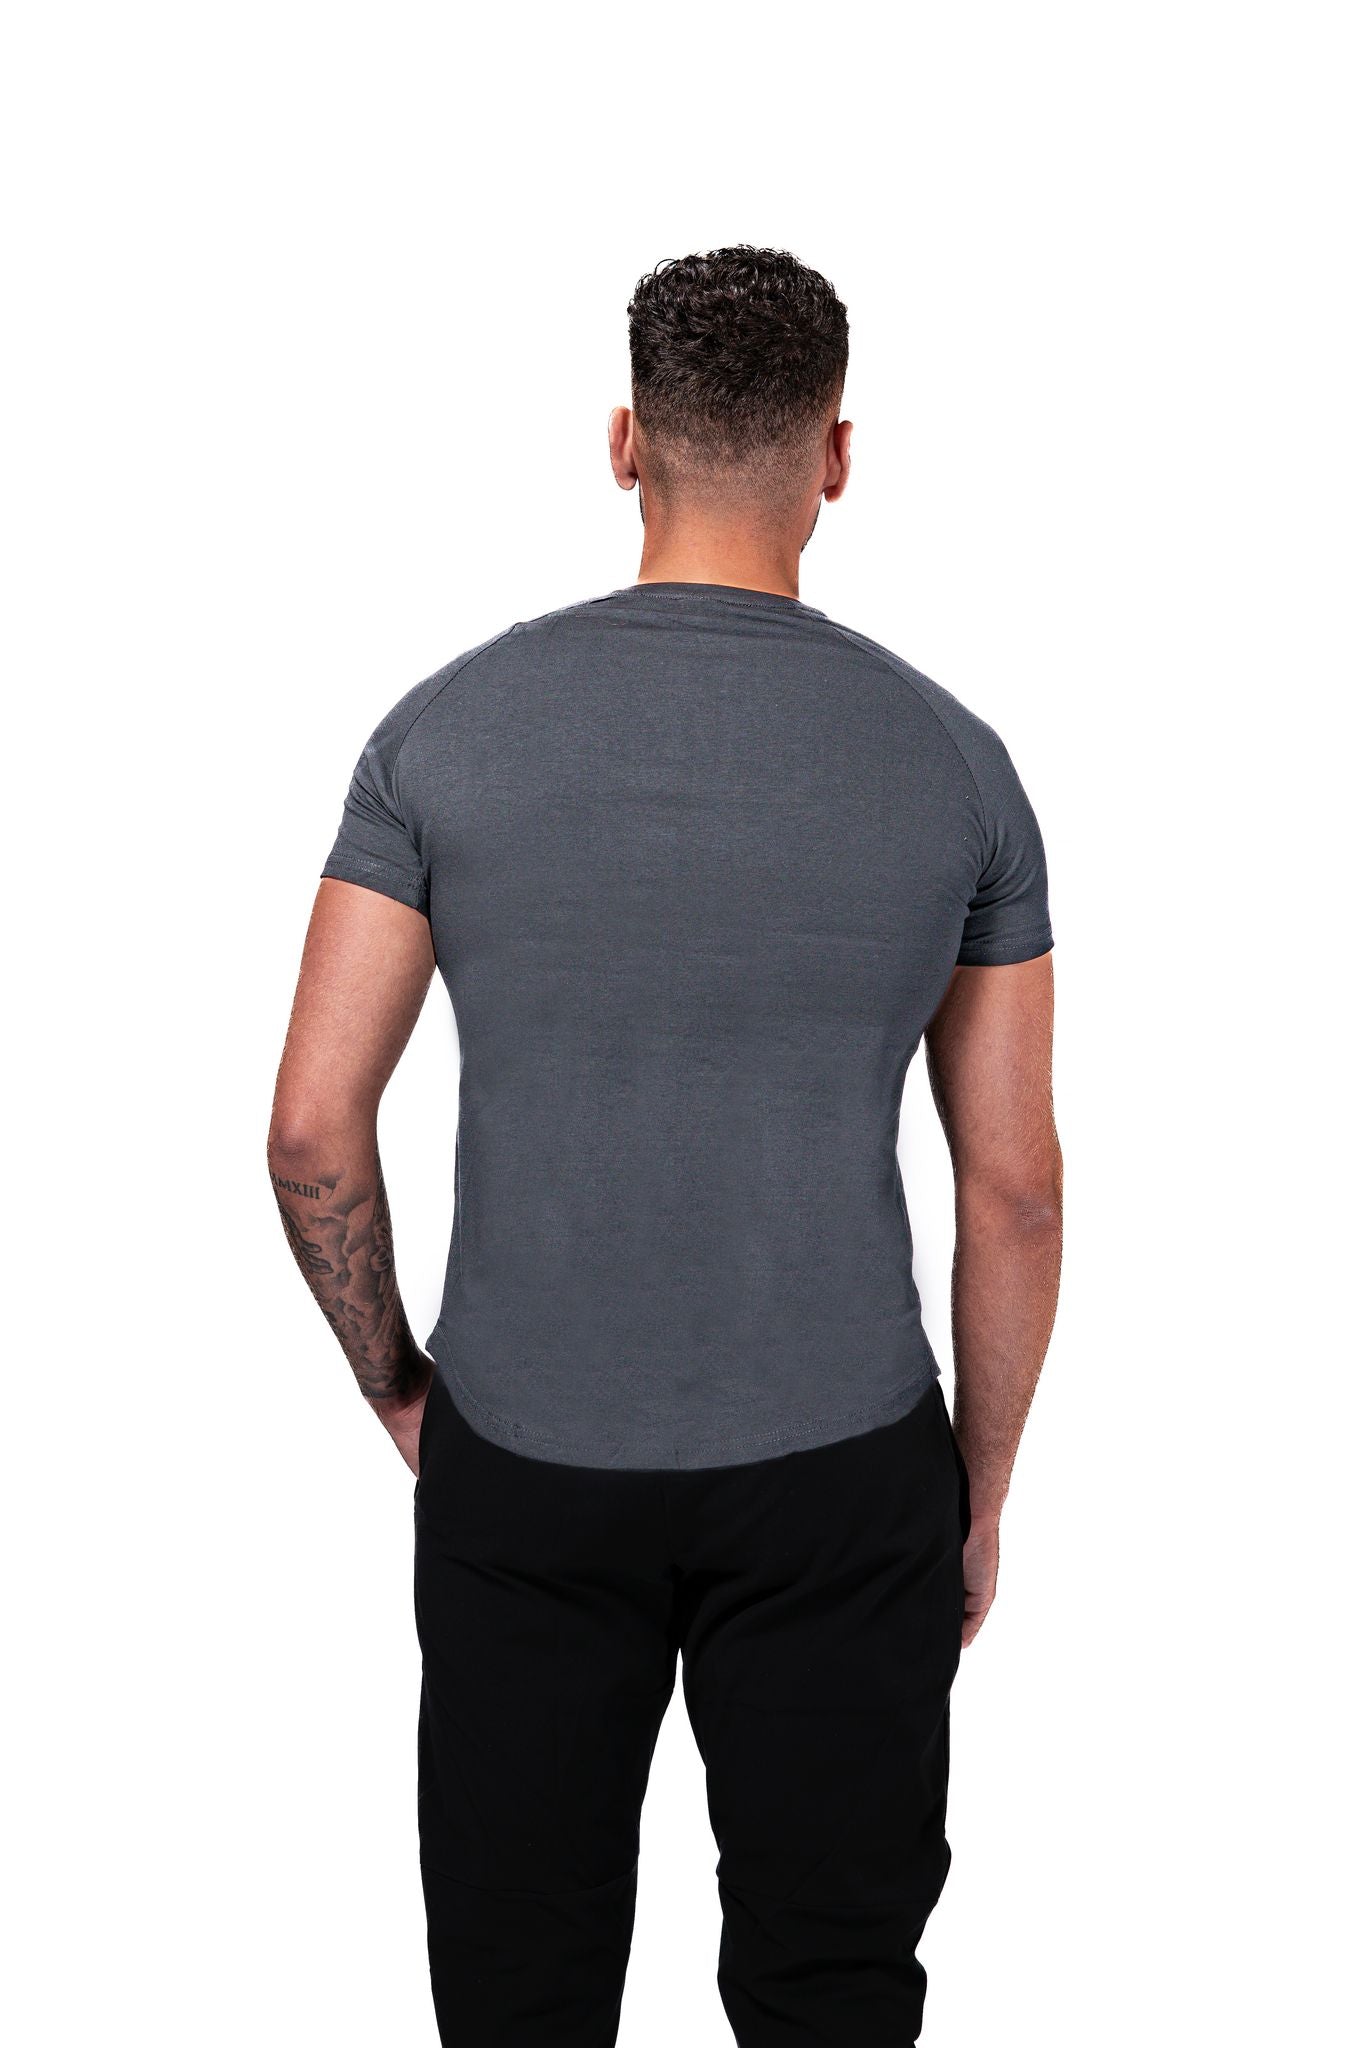 The Signature Curved Slim Grey T-shirt